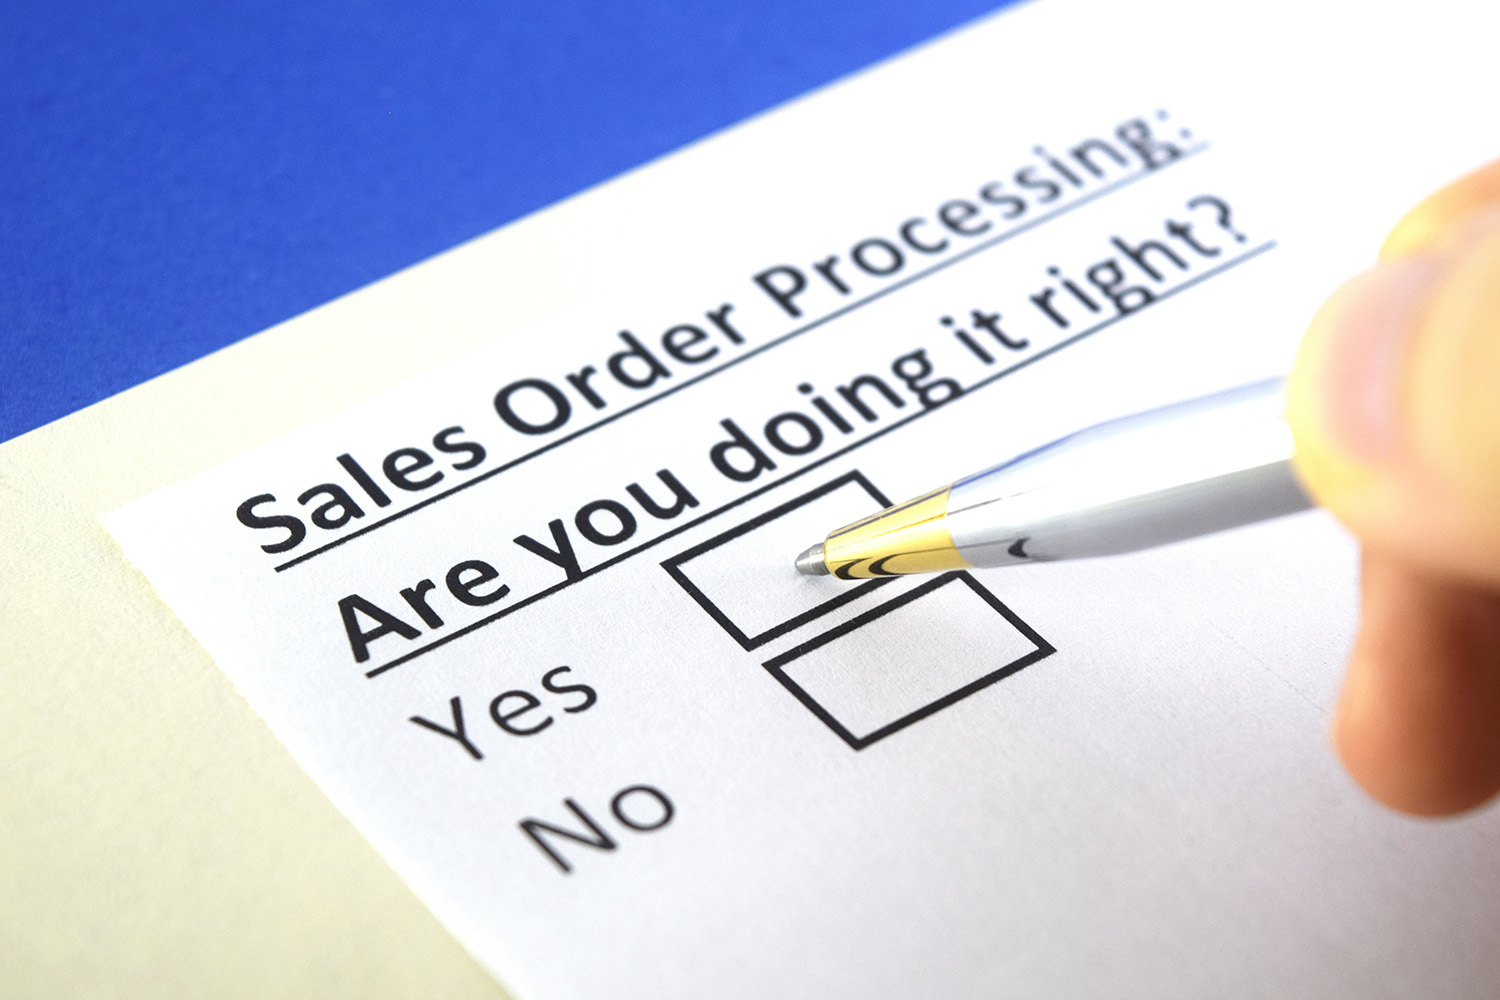 One person is answering question about sales order processing.